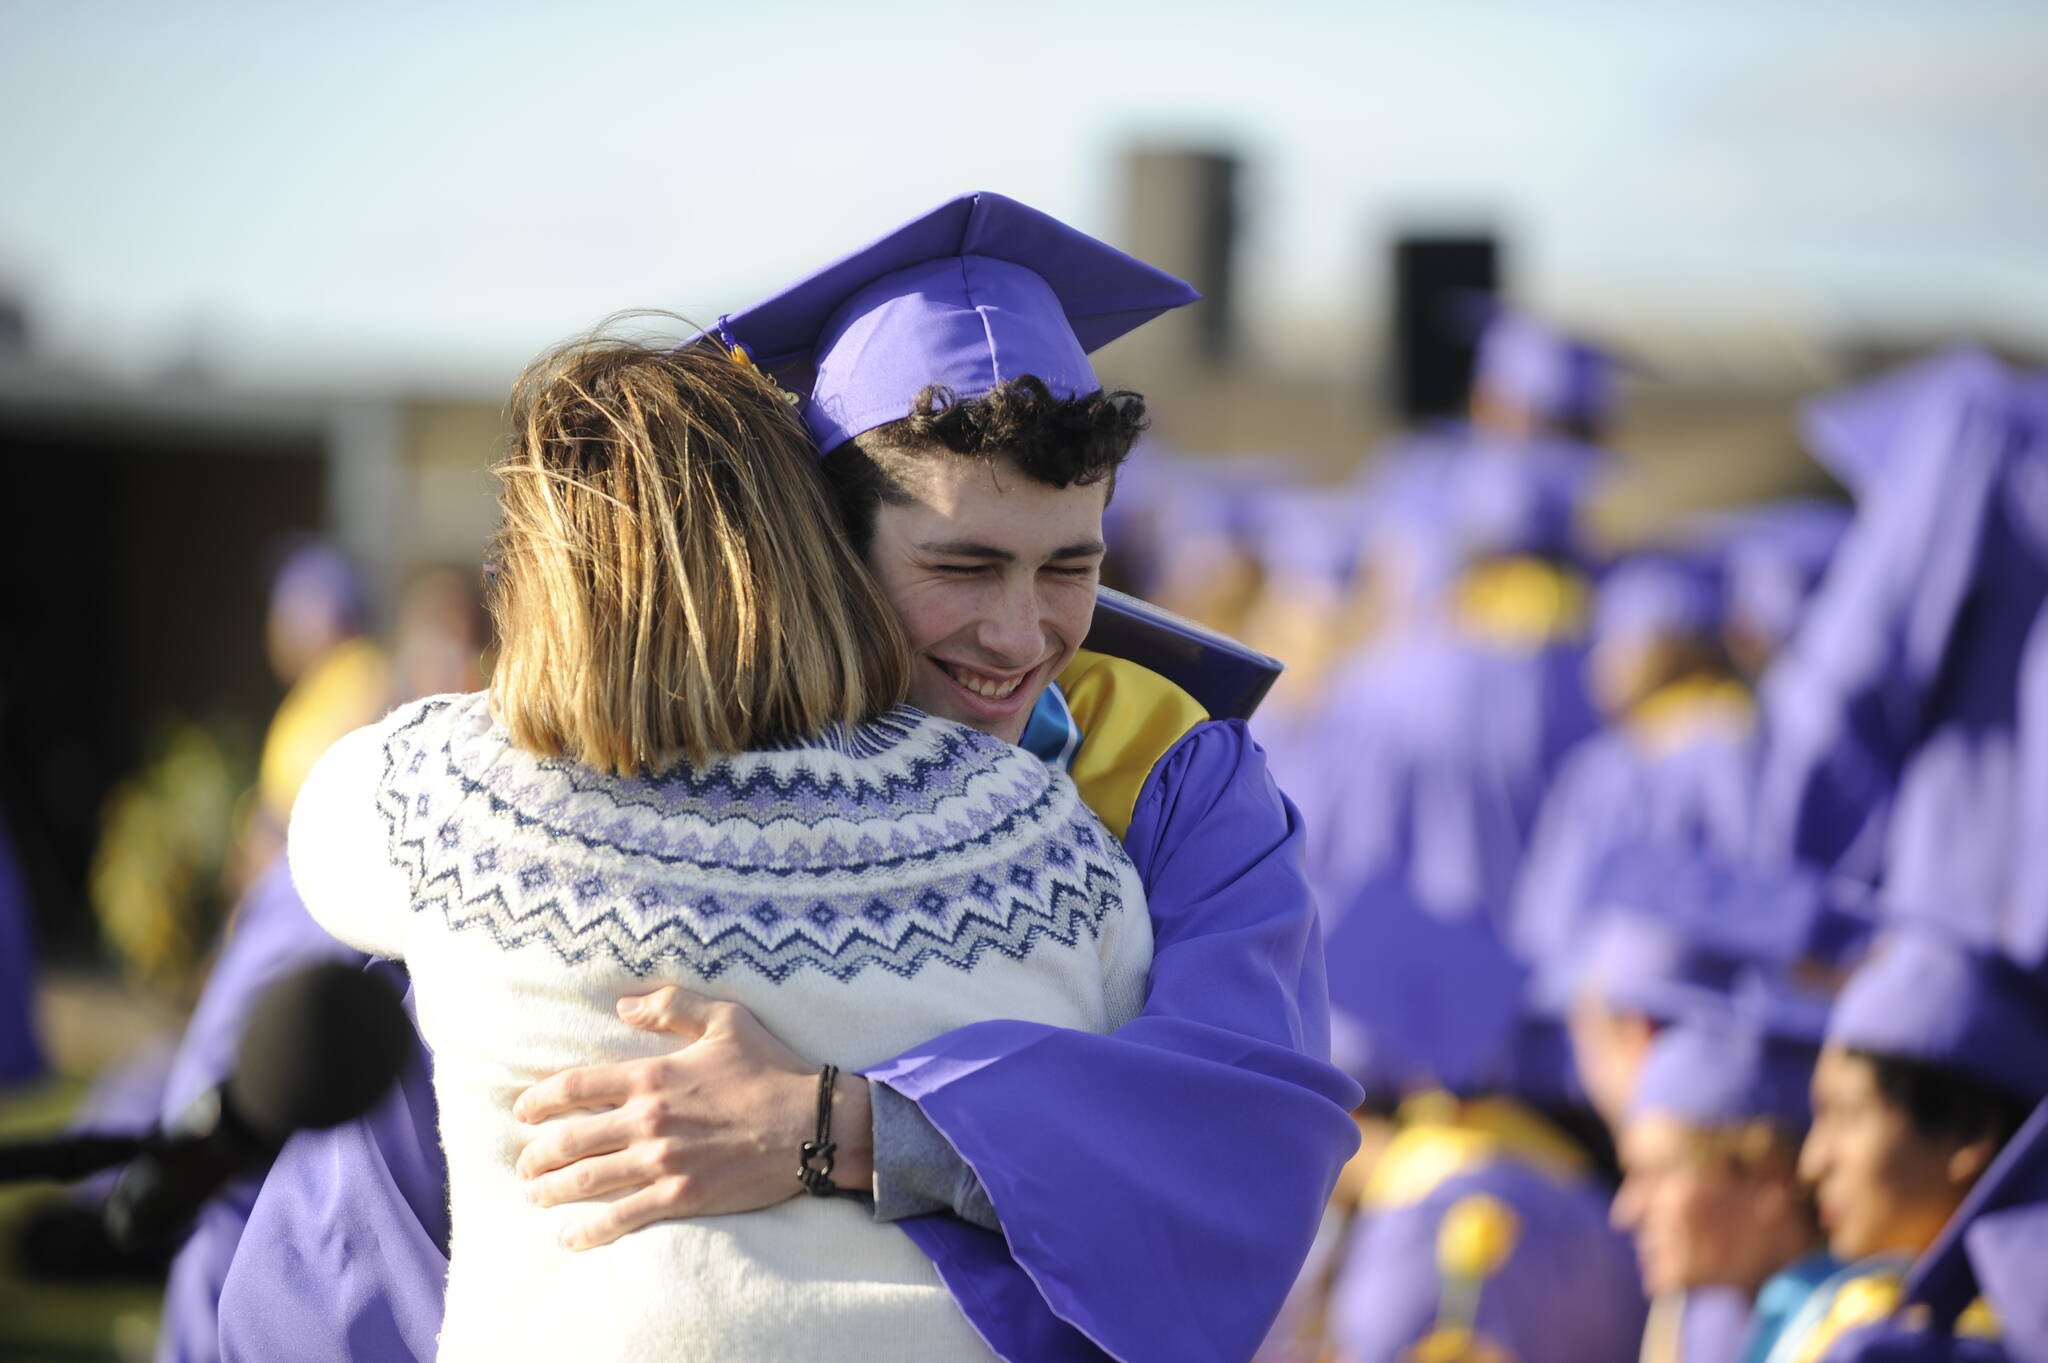 Michael Dashiell / Olympic Peninsula News Group
Graduating senior Ayden Humphries gets a hug from school board member Patrice Johnston at the Sequim High School commencement ceremony on Friday.